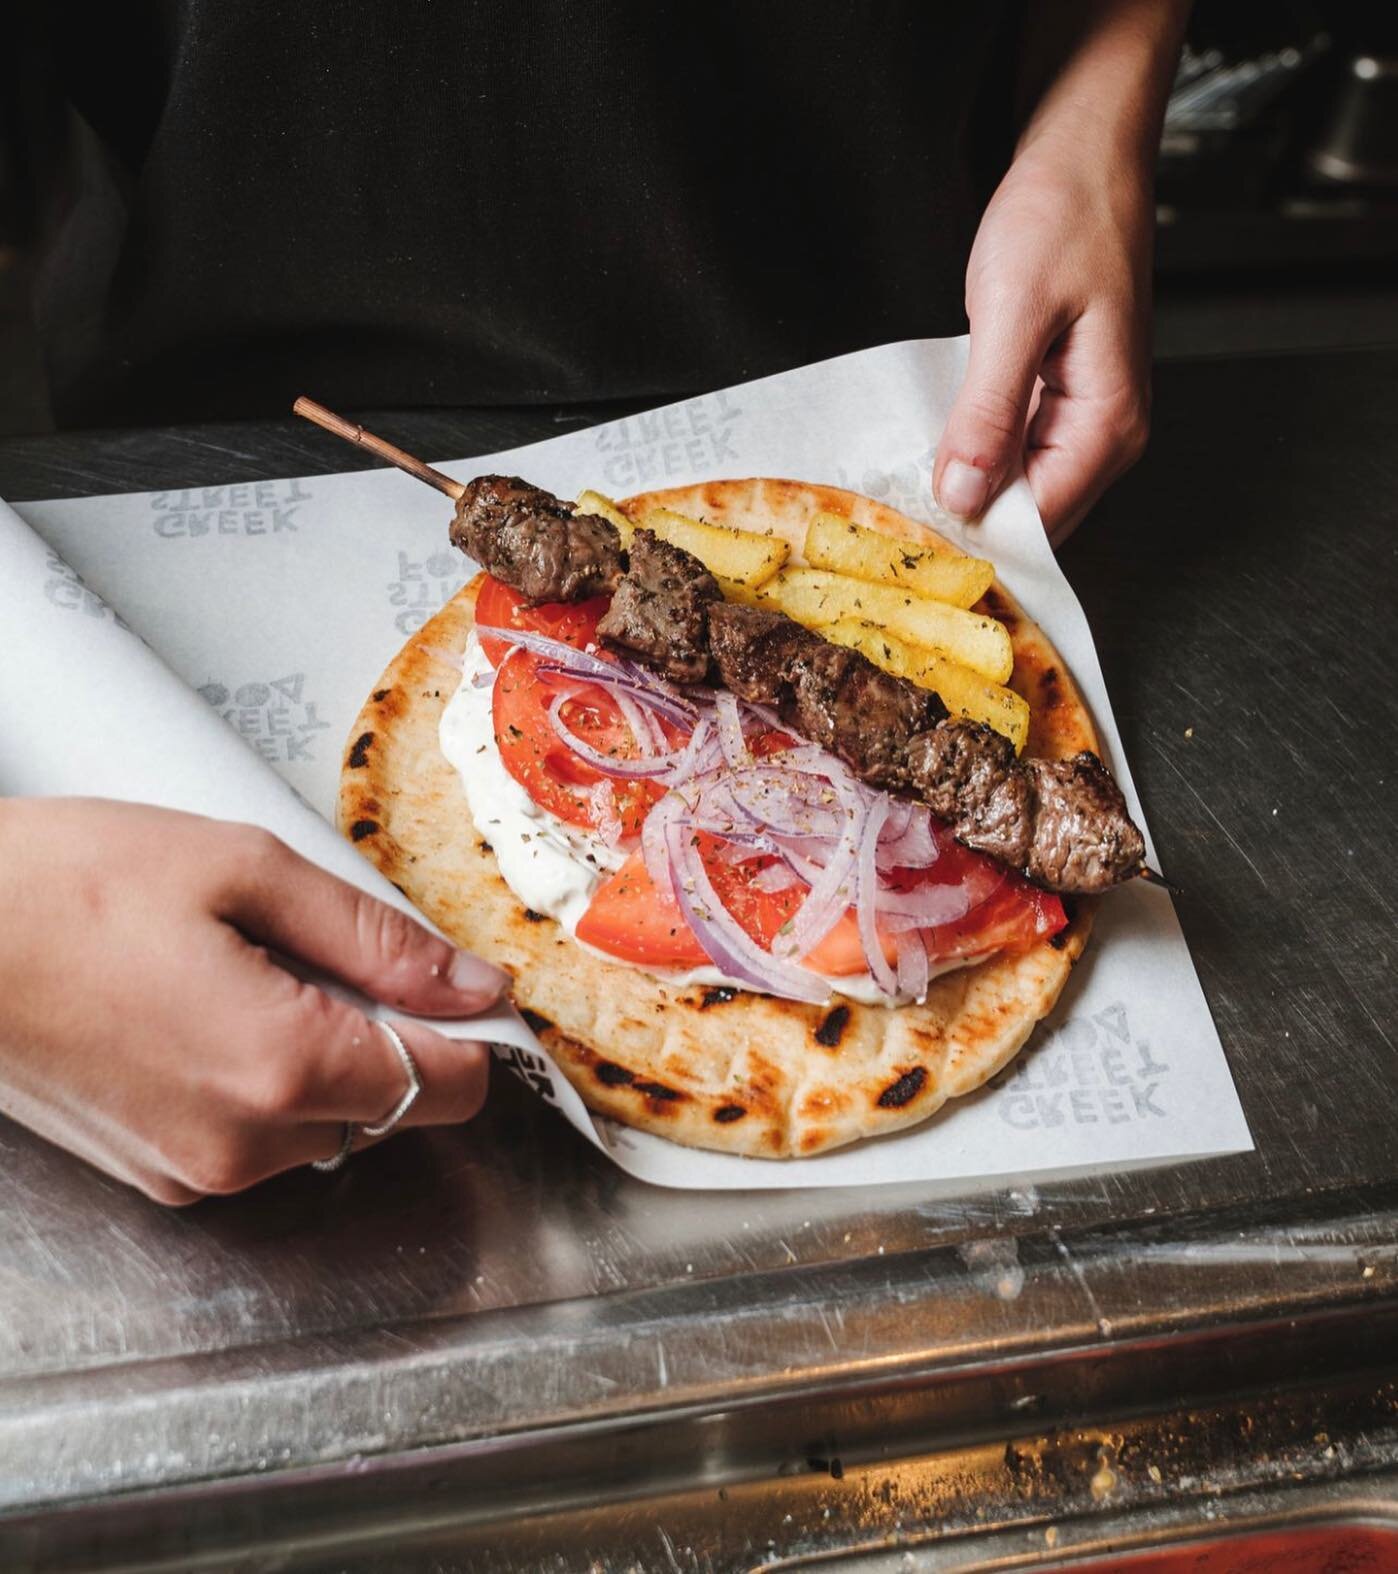 Serving it up hot and fresh, just how you like it !

📸 Greek Street Food